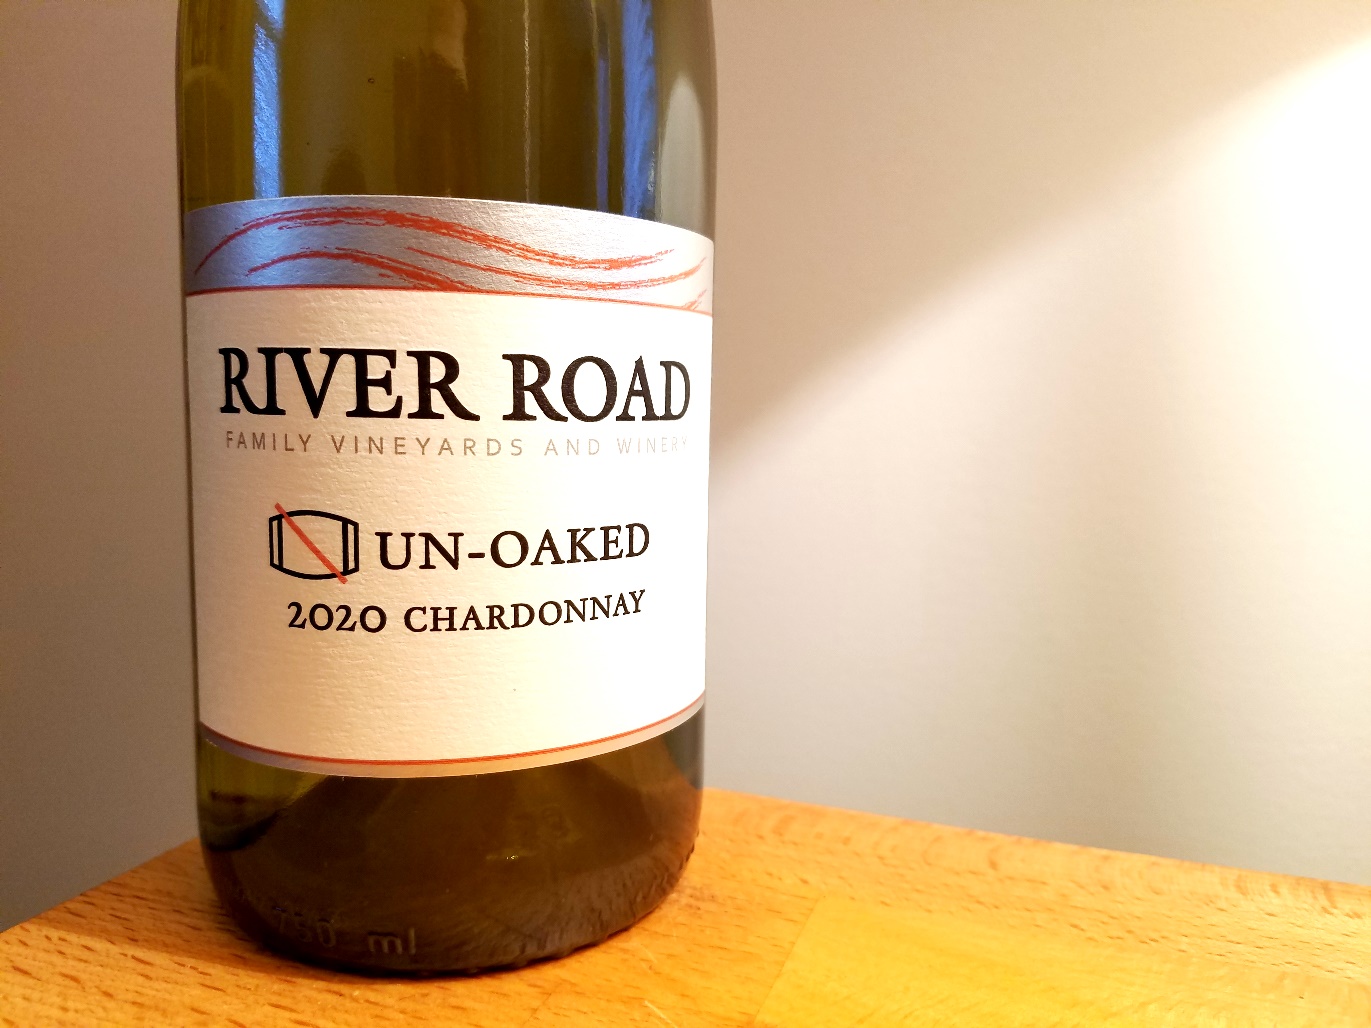 River Road Family Vineyards and Winery, Unoaked Chardonnay 2020, California, Wine Casual